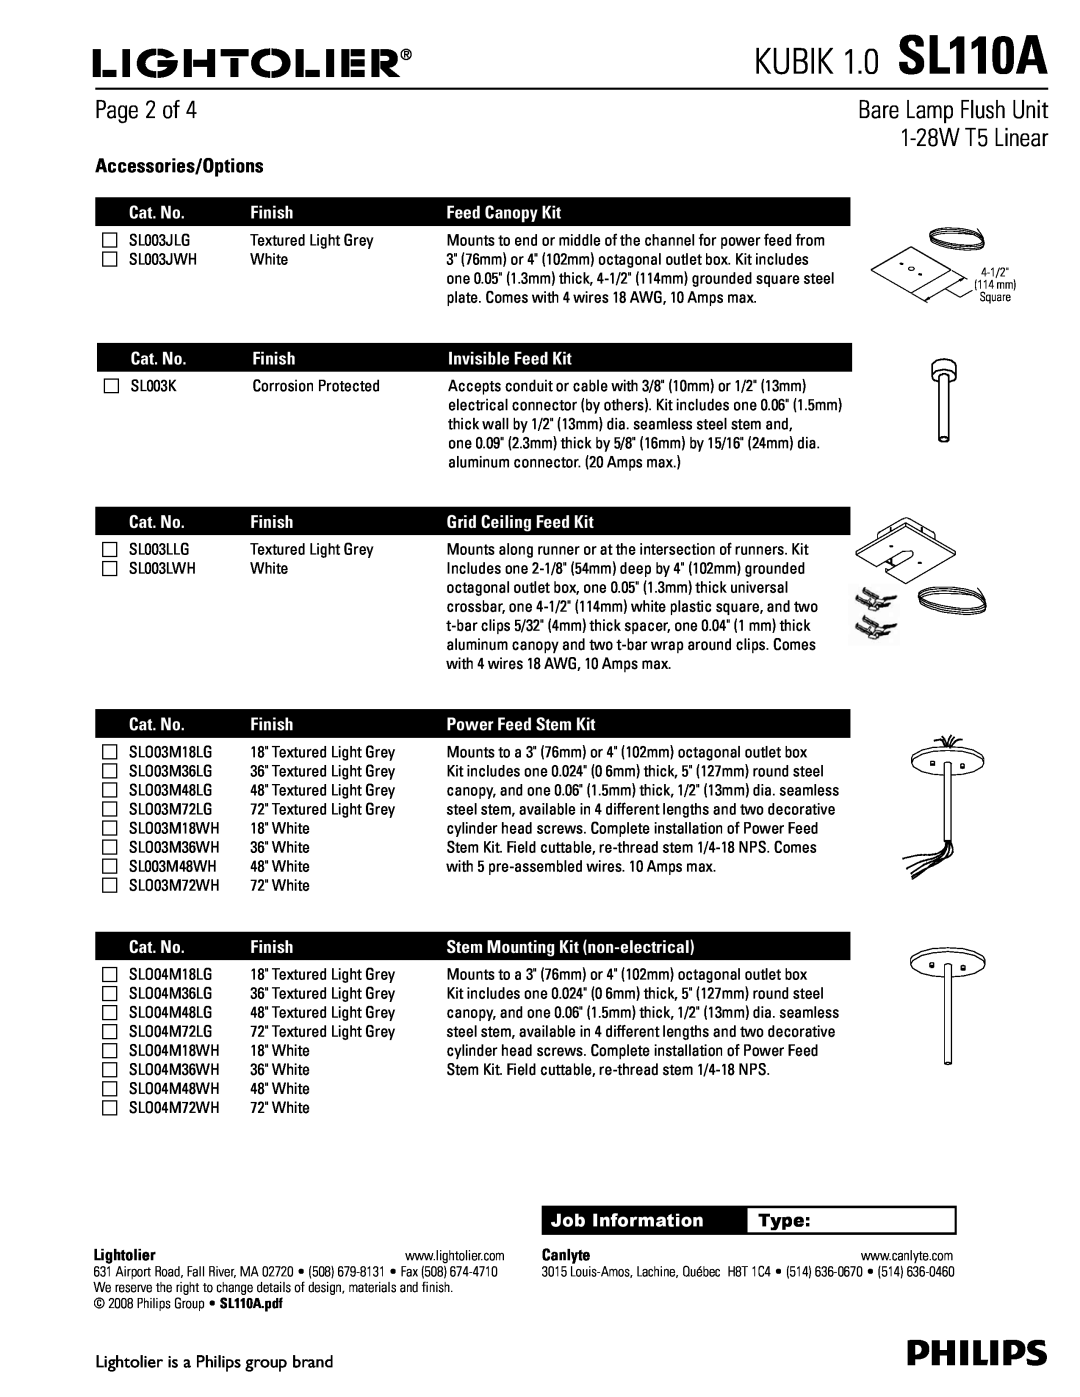 Philips dimensions KUBIK 1.0 SL110A, Page 2 of, Accessories/Options, Bare Lamp Flush Unit 1-28WT5 Linear, Type 